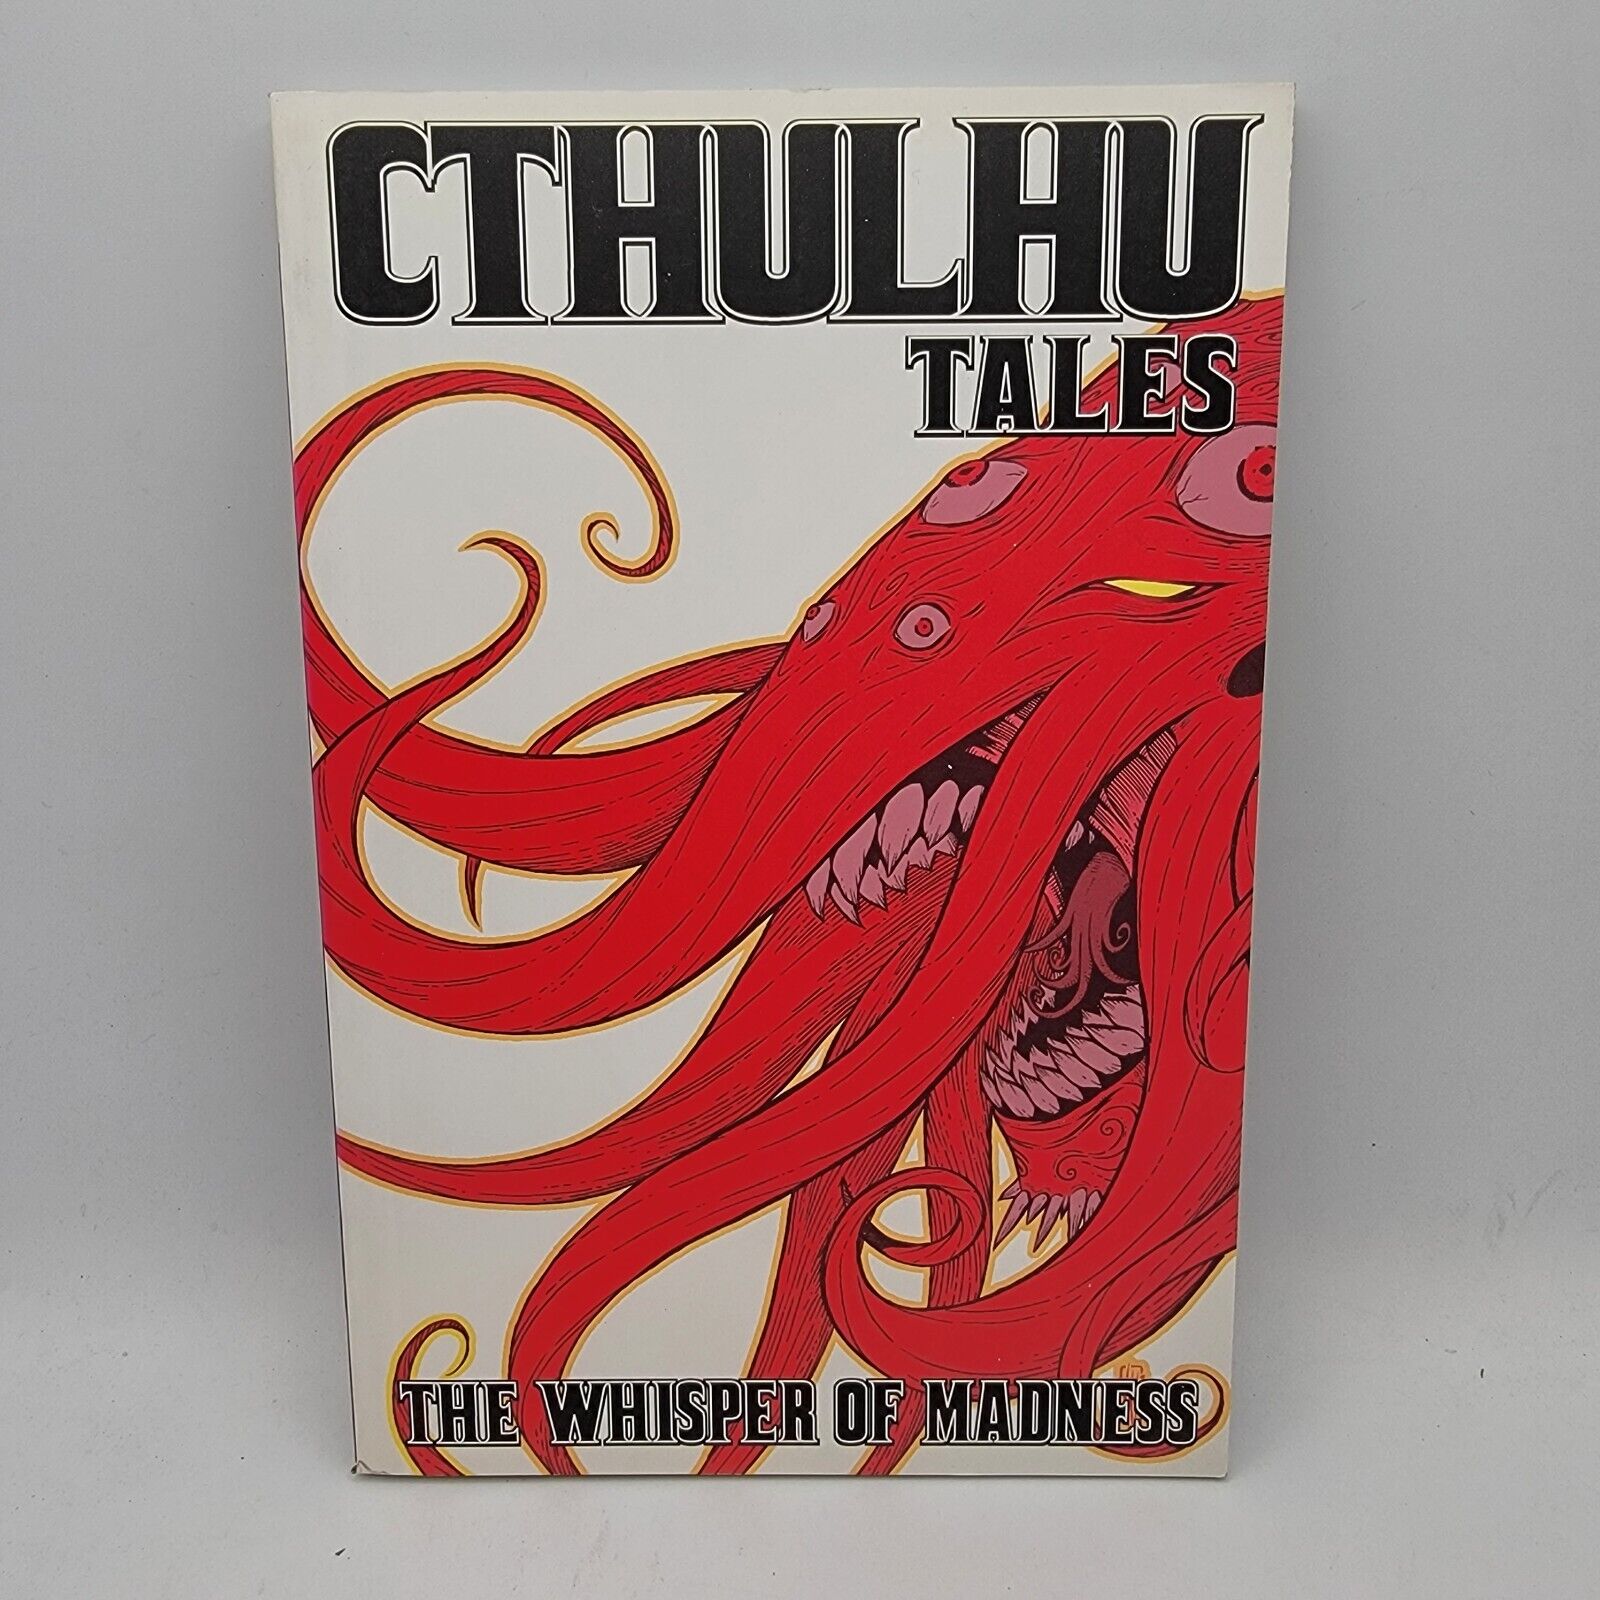 Cthulhu Tales: The Whisper of Madness by Steve Niles BRAND NEW UNREAD Comic Book